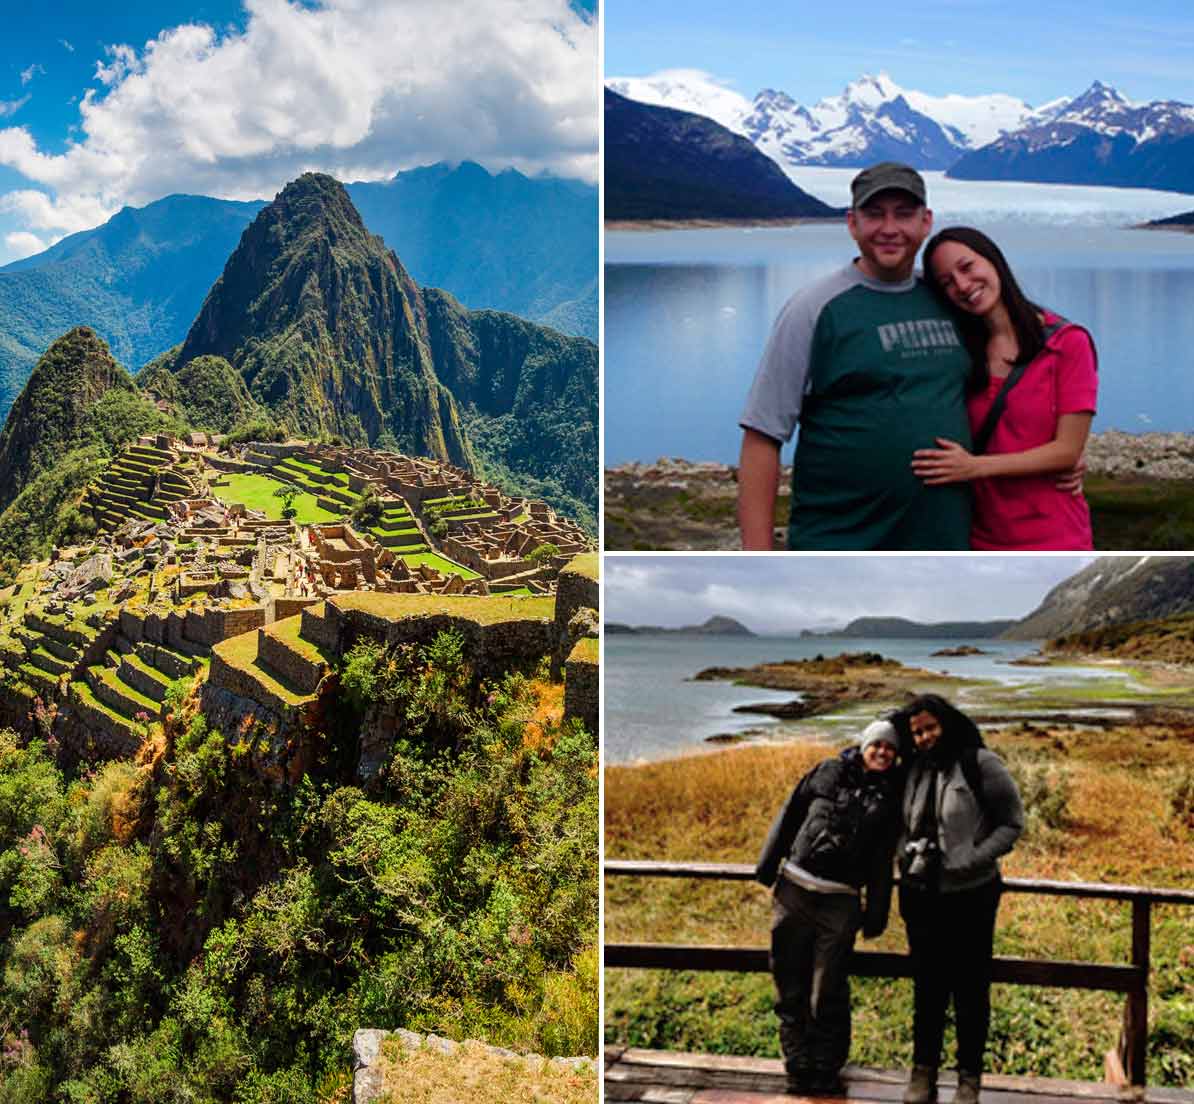 A collage showing Machu Picchu as well as two pairs of tourists posing in front of landscapes.